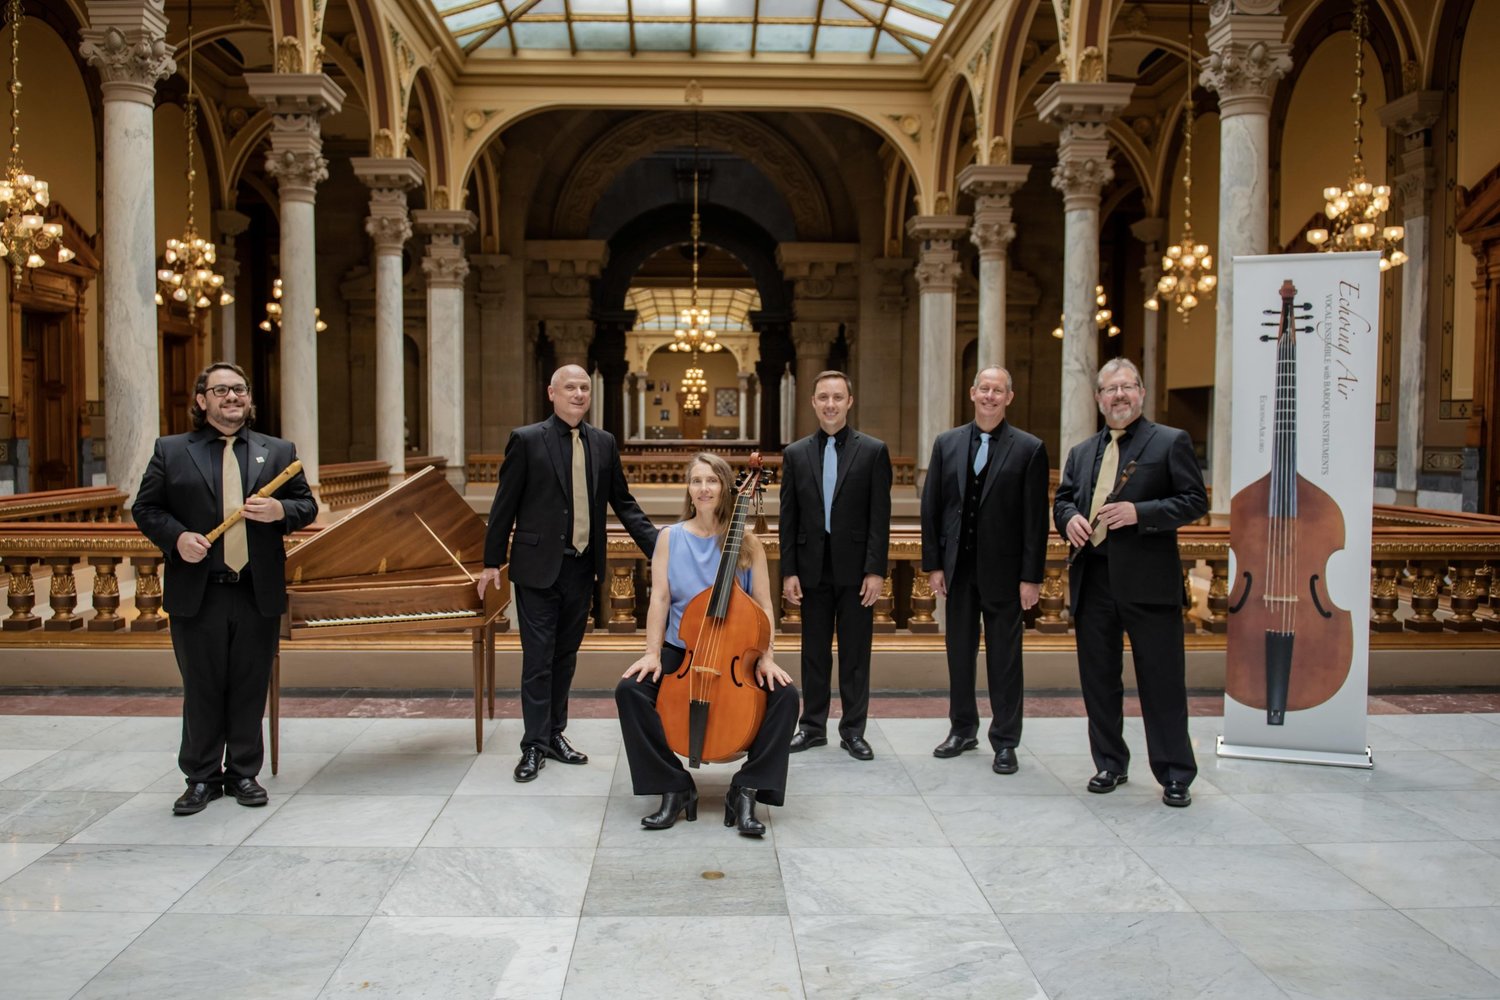 Echoing Air, an Indianapolis-based vocal ensemble with baroque instruments, will present its touring "A Season of Penitence: Music for Lent" concert at St. Paul's Episcopal Church 4 p.m. Sunday